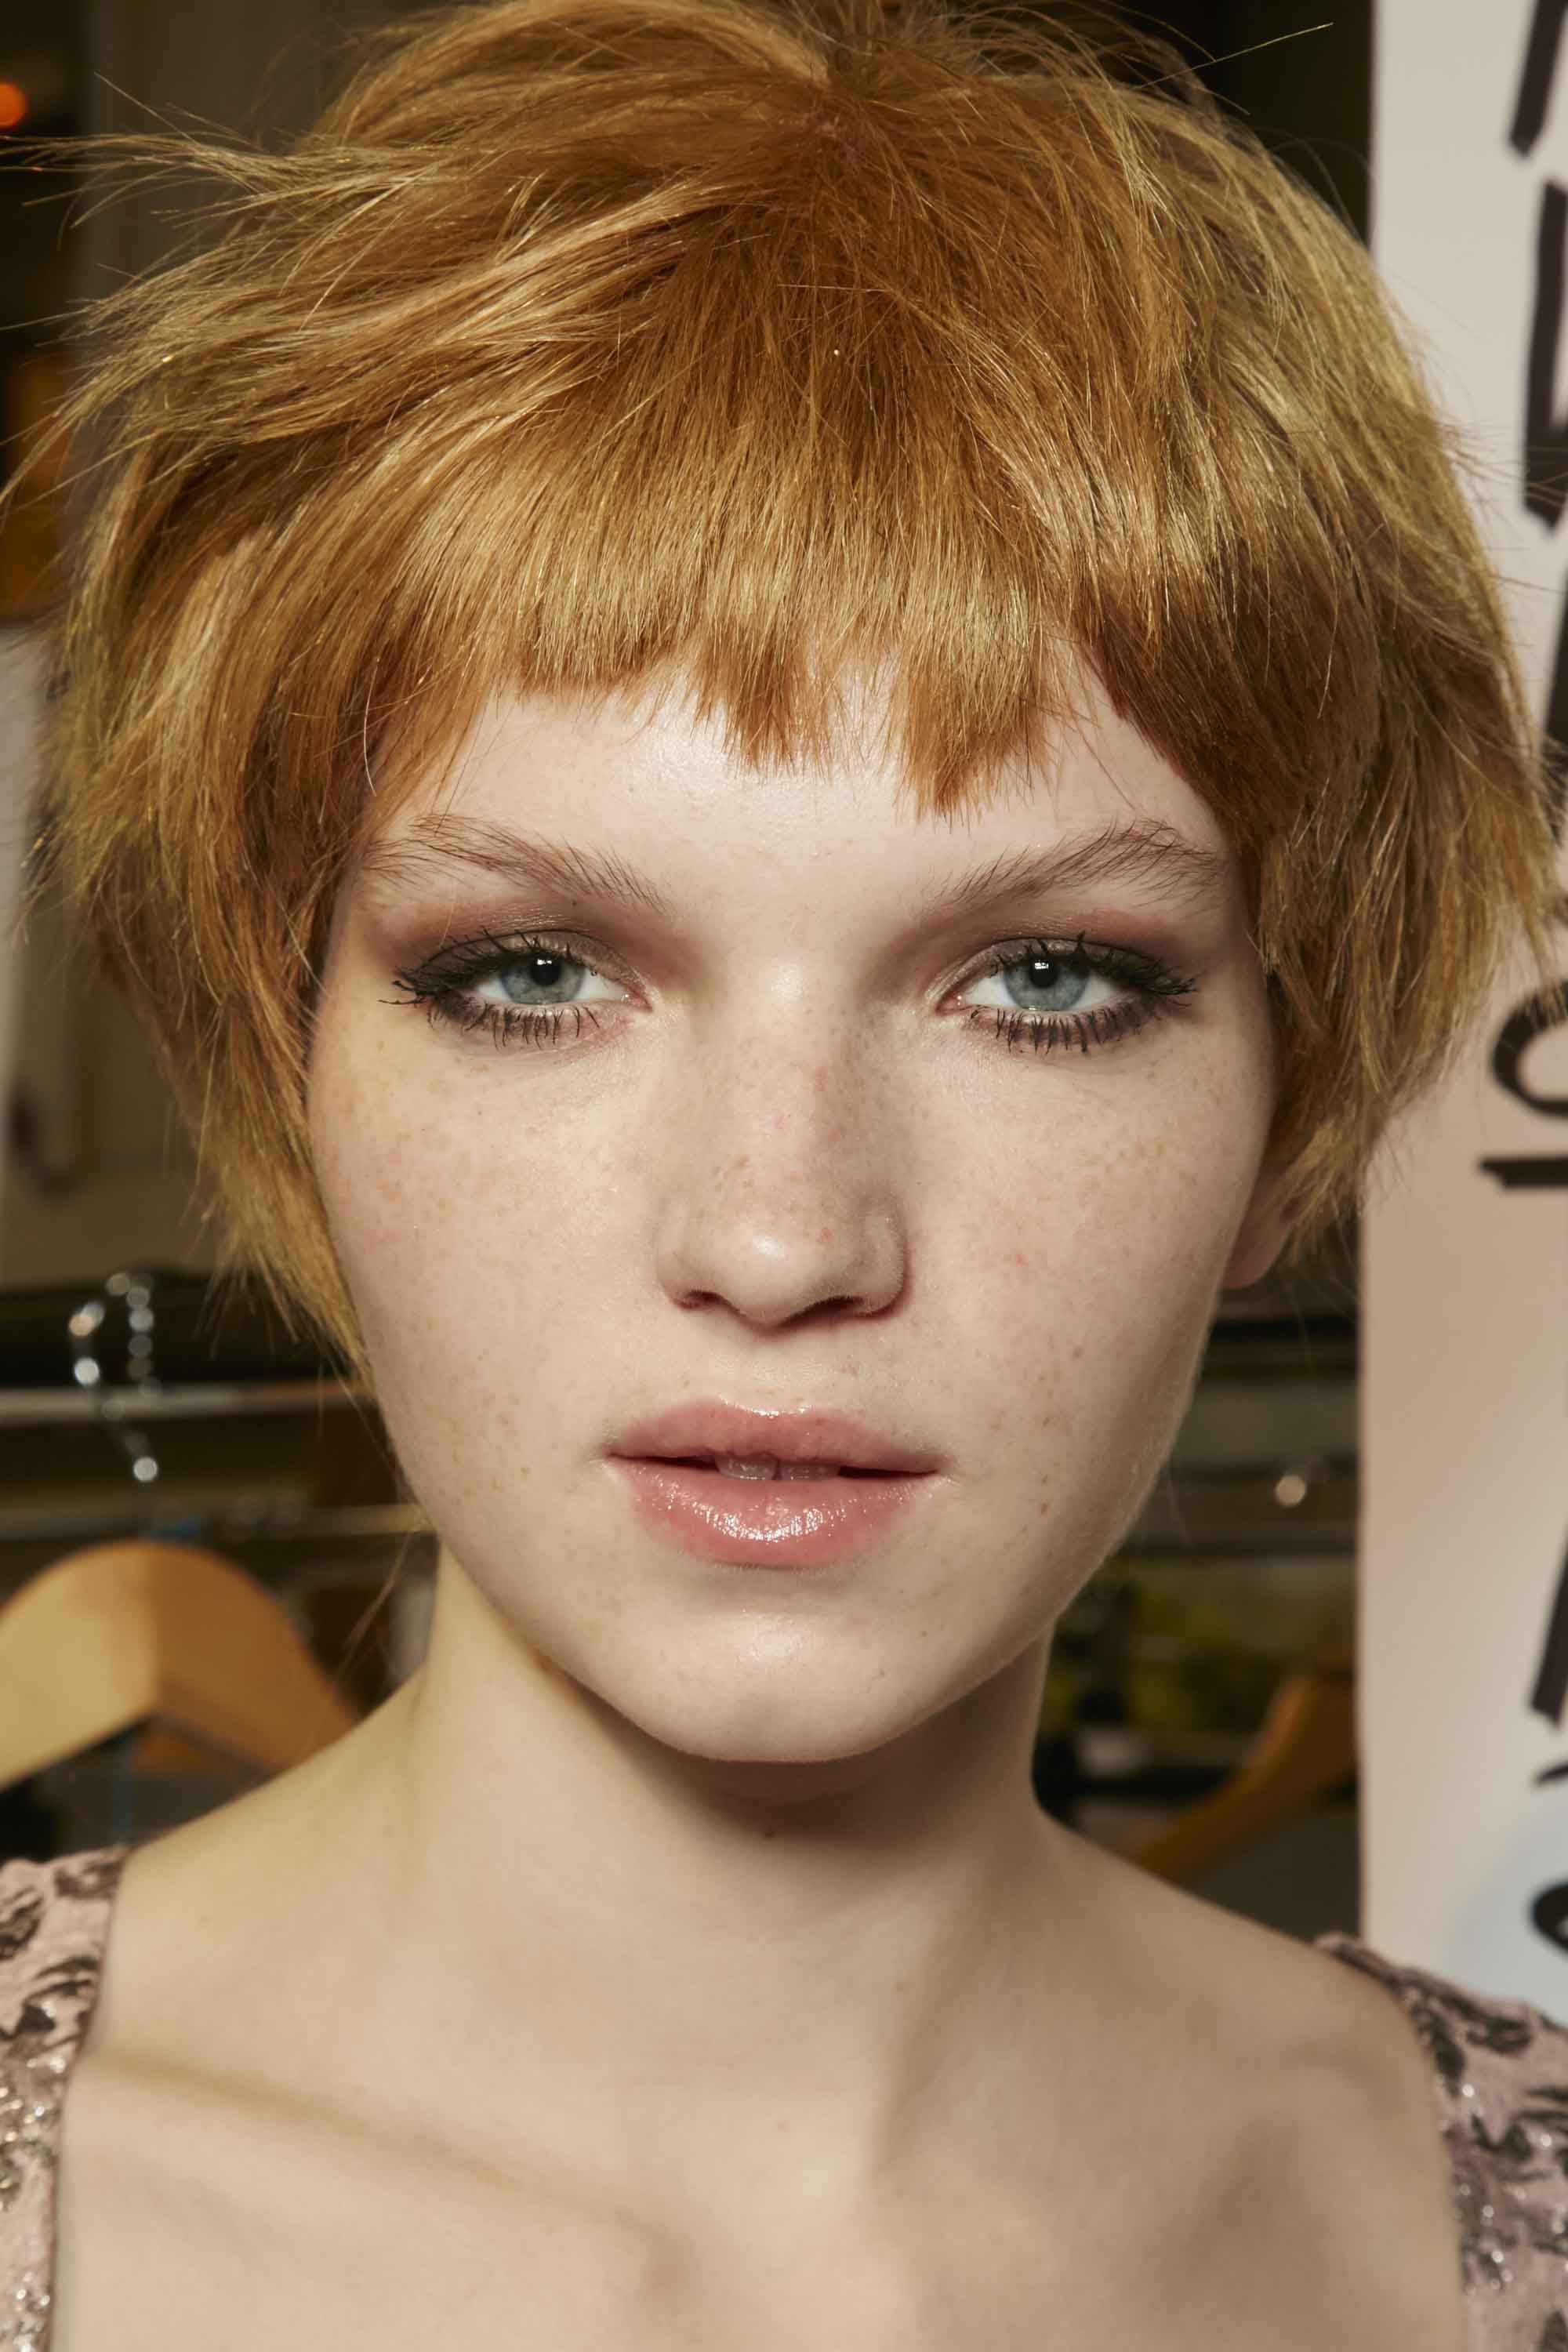 5 Cool Ways To Wear Short Bangs – Plus Need To Know Styling Tips Pertaining To Short Hairstyles With Fringe (View 8 of 25)